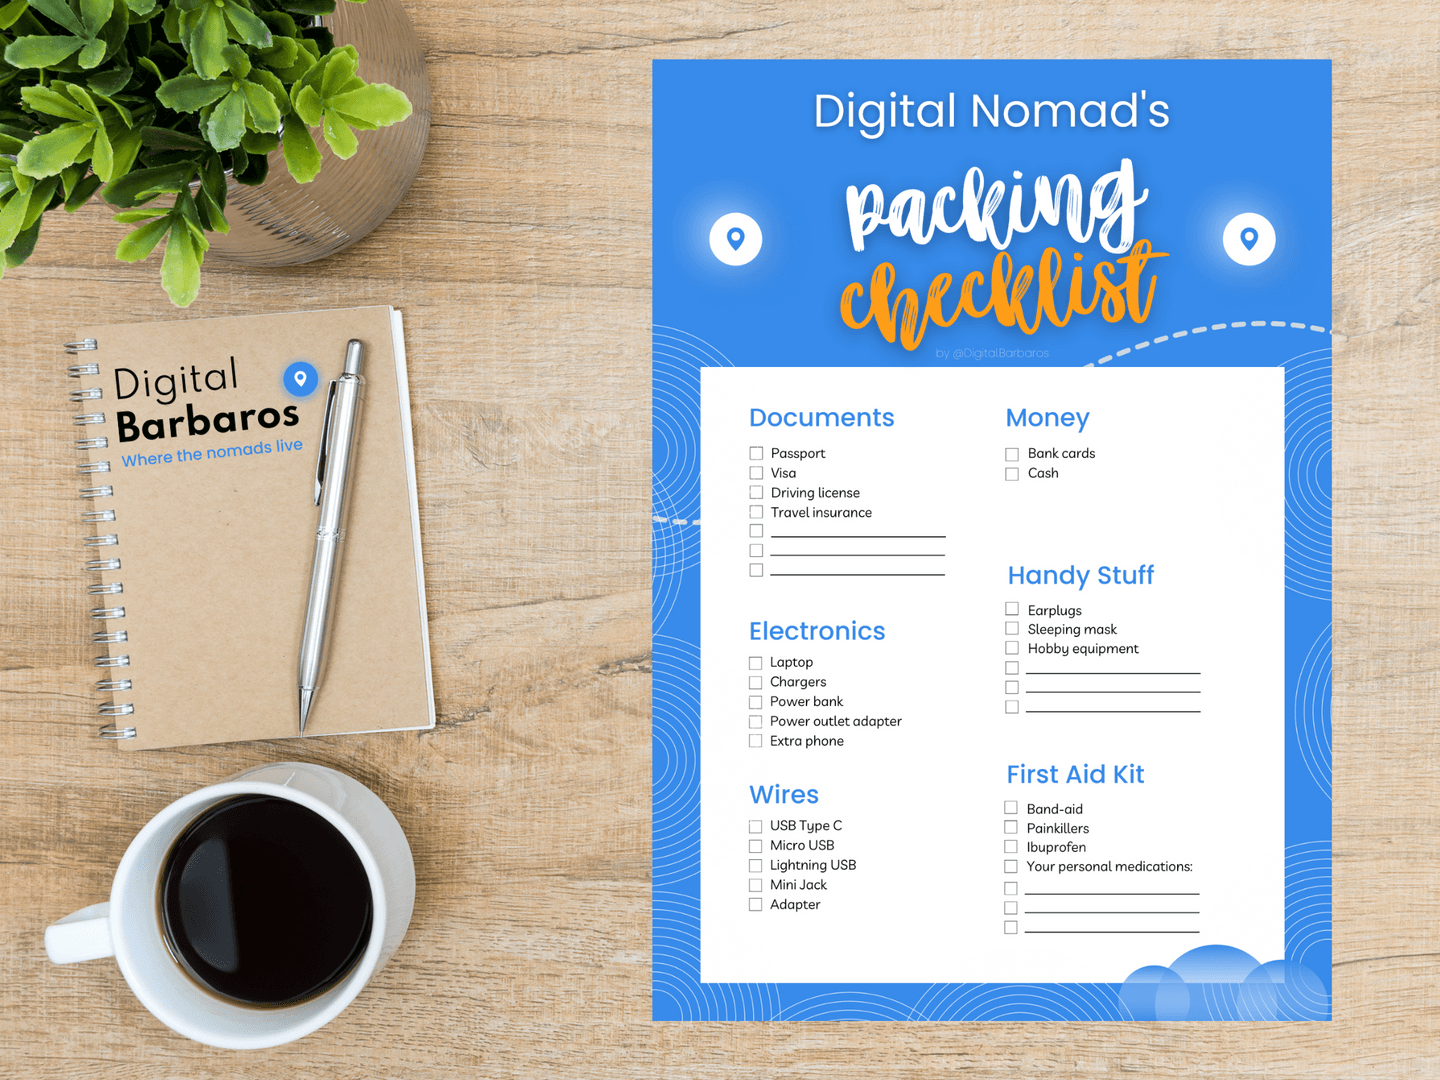 Guide For The Digital Nomad Packing Checklist